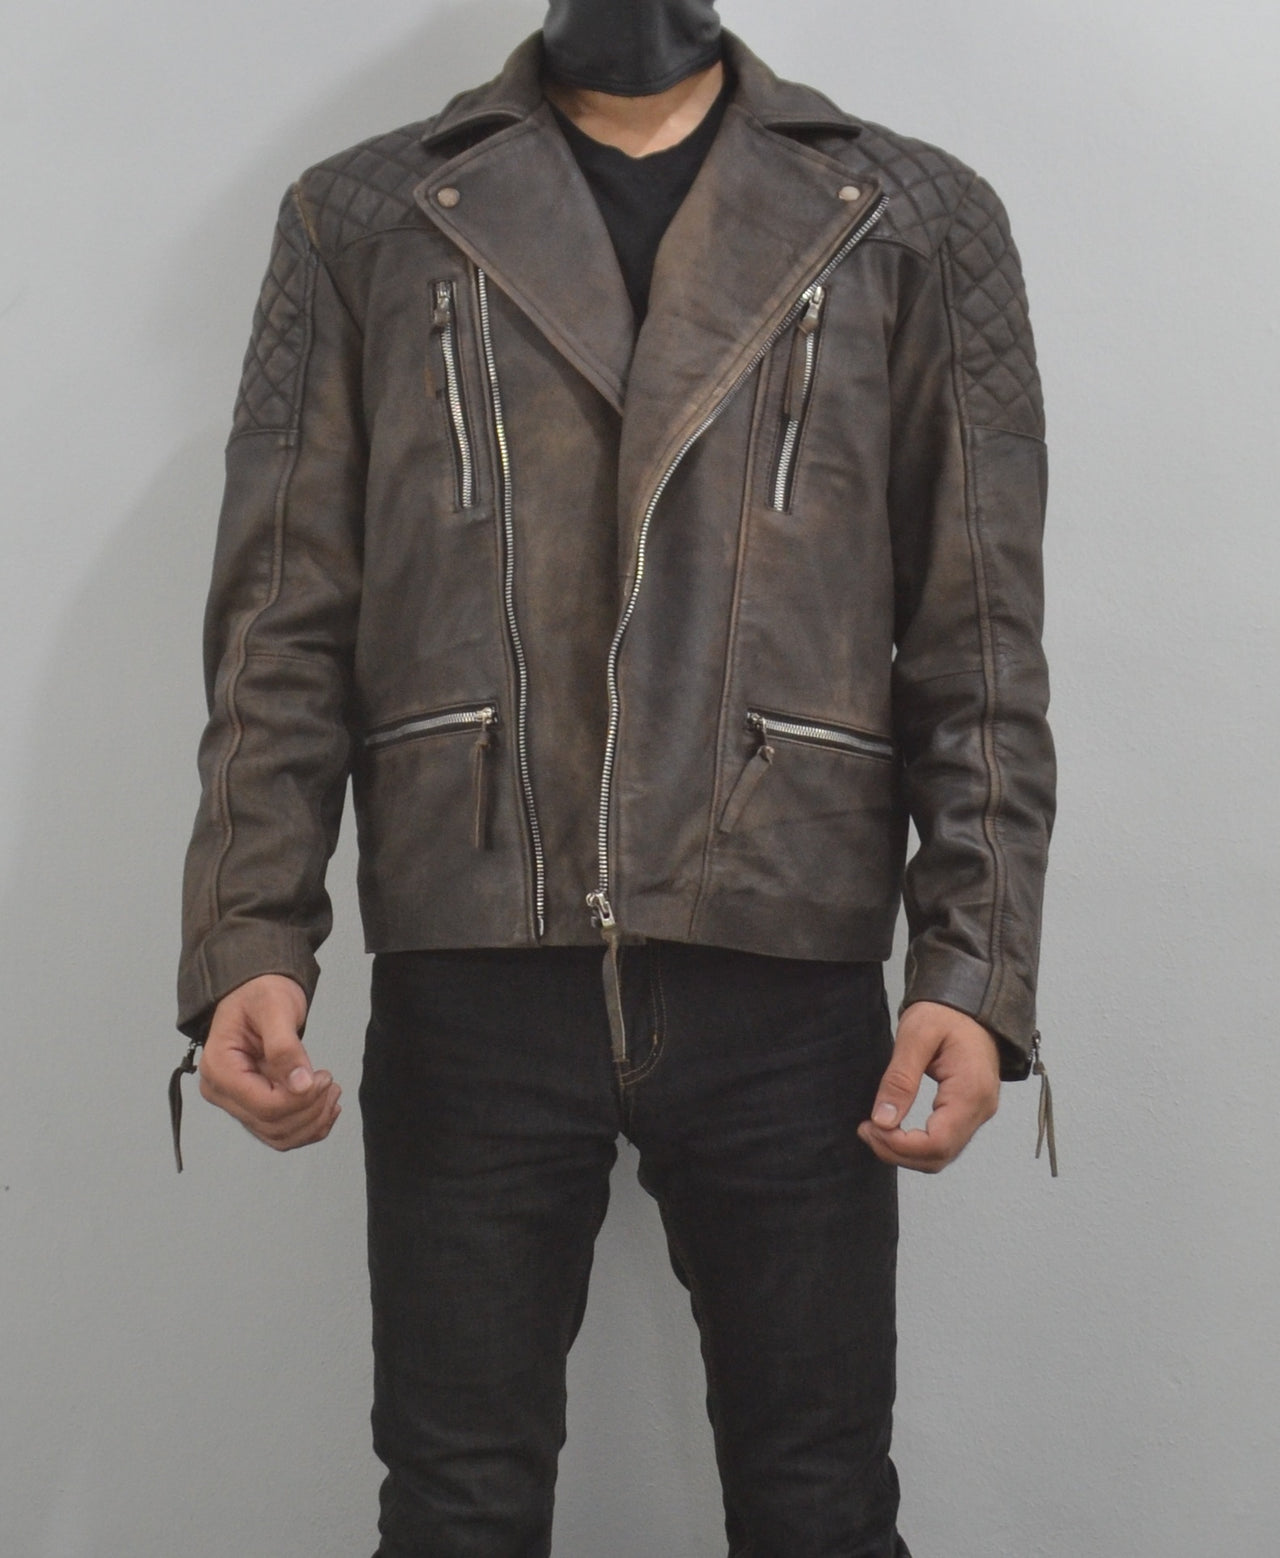 Motorcycle Distressed Natural Rugged Biker Leather Jacket